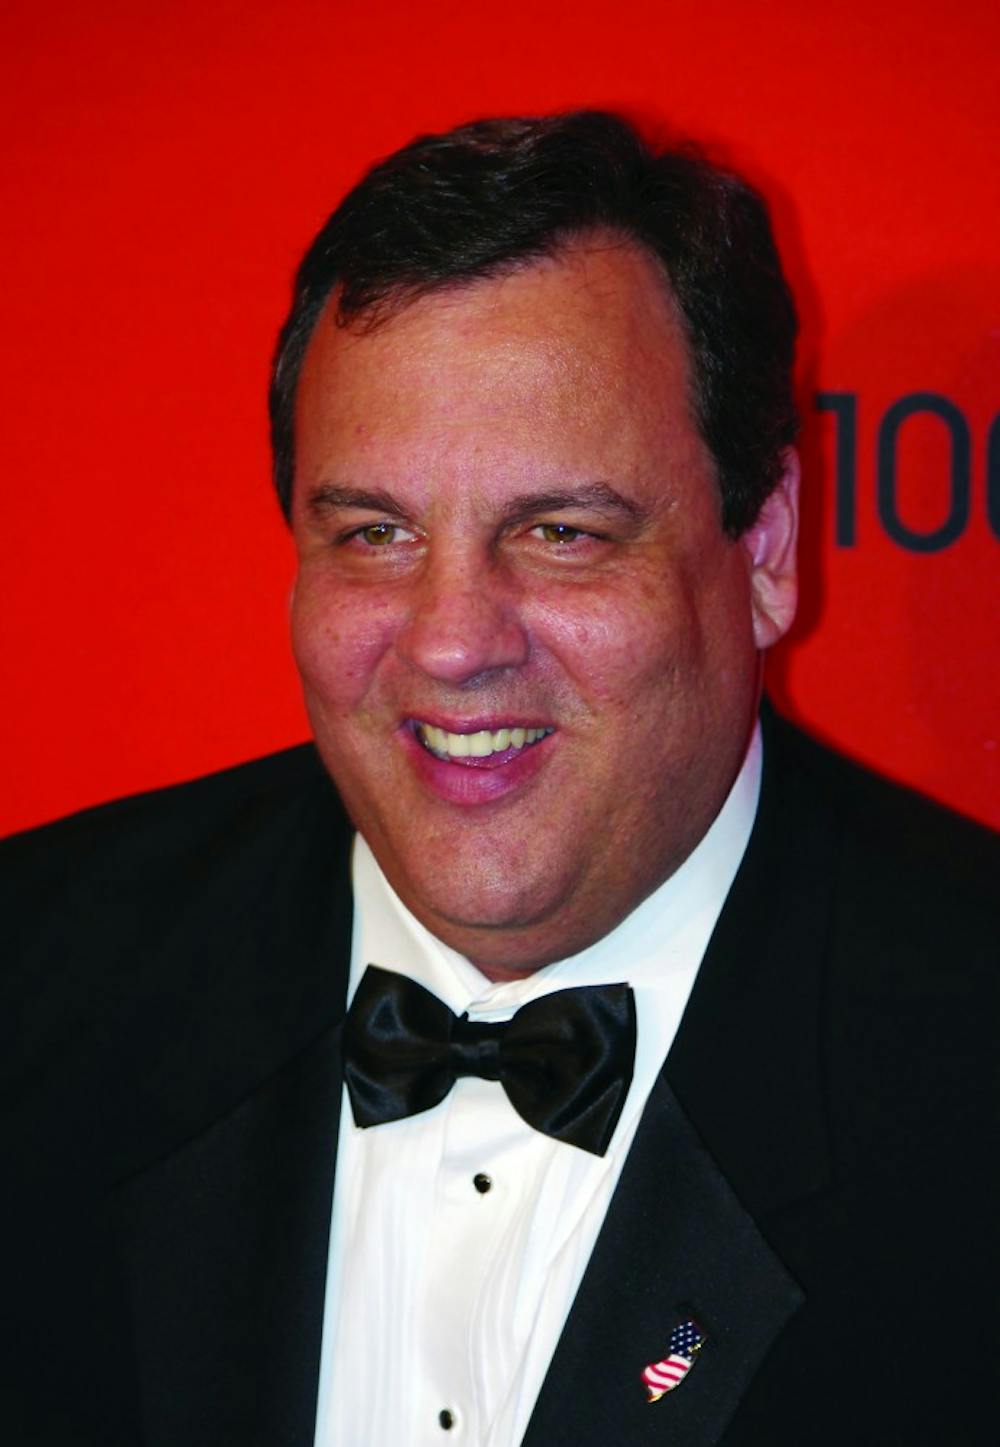 What is happening with the Chris Christie scandal in New Jersey?